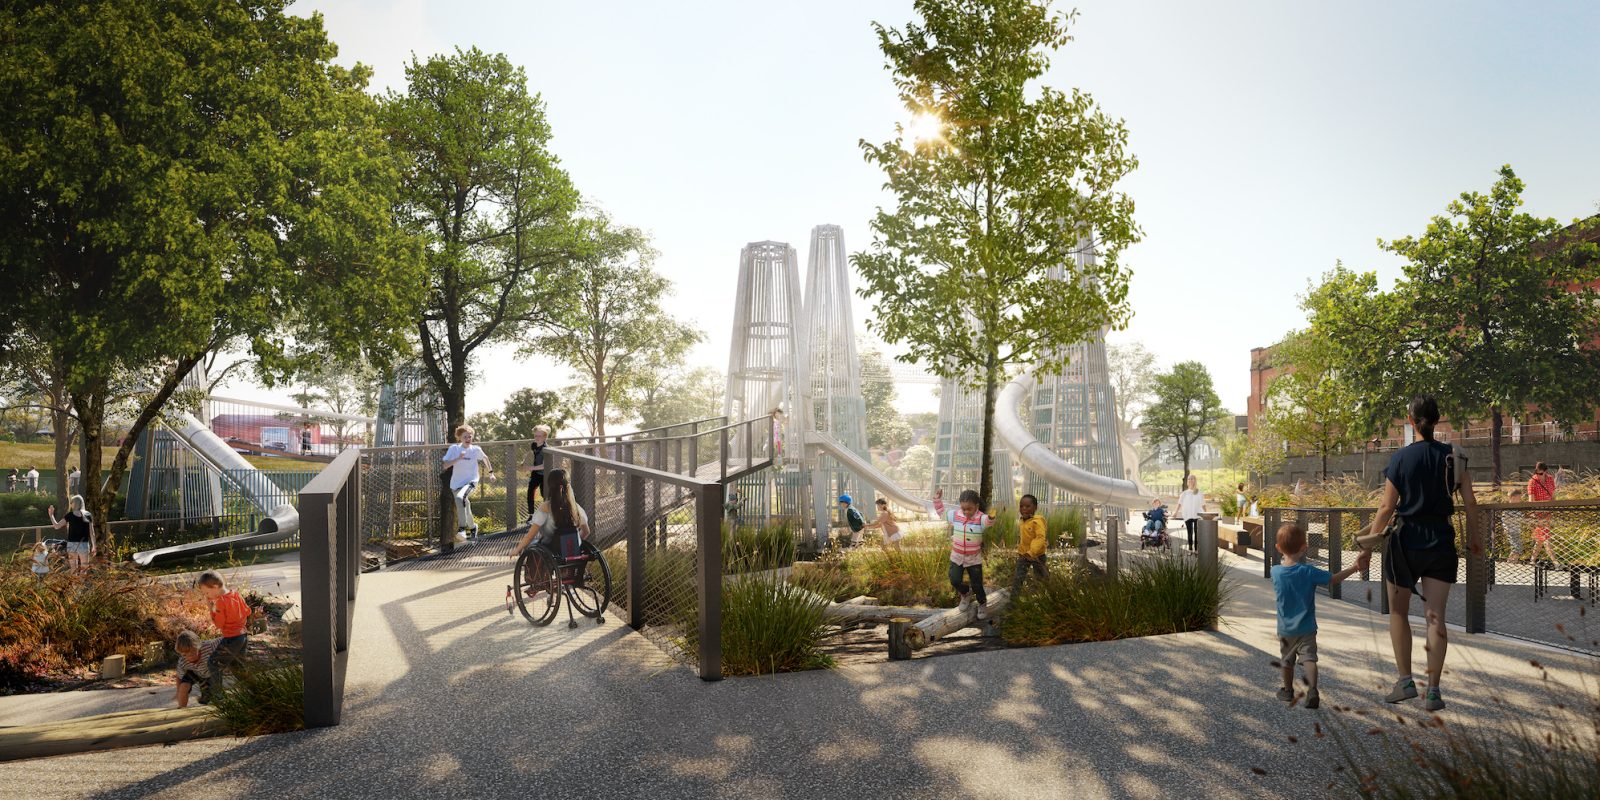 Mancs will soon be able to slide over the River Medlock, Mayfield Play Yard plans reveal, The Manc